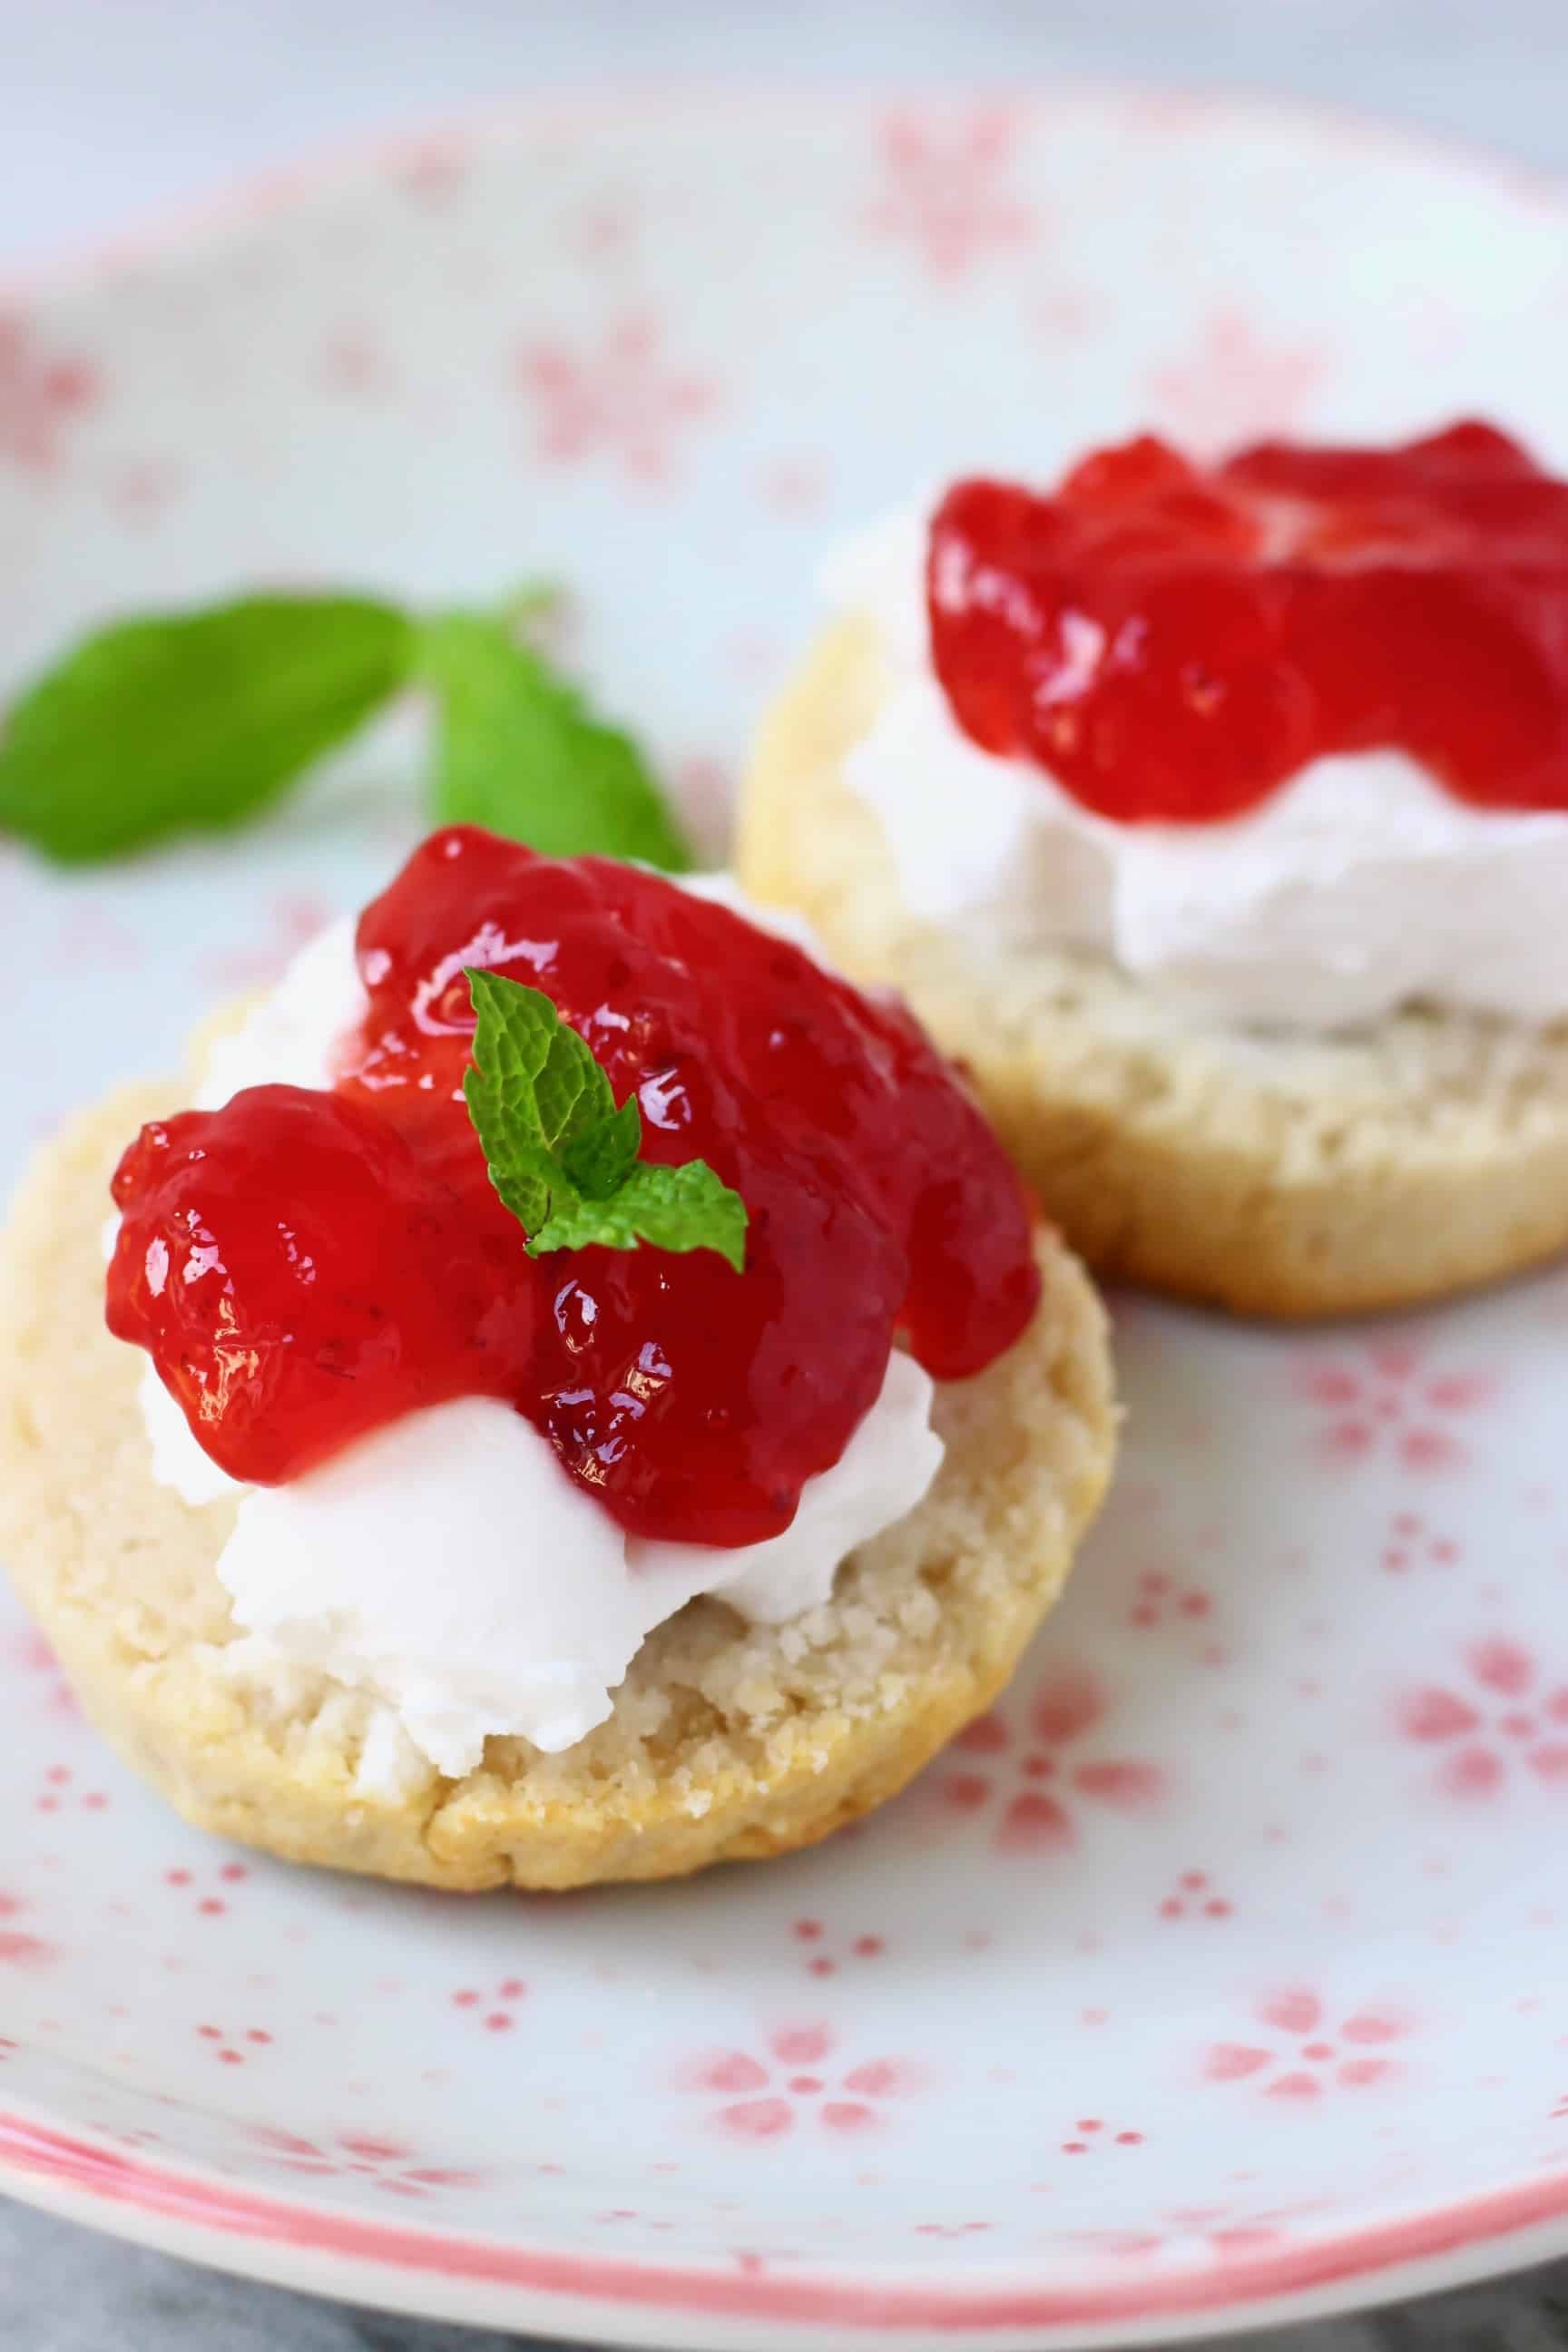 Two gluten-free vegan scones halves topped with white cream and strawberry jam decorated with mint leaves on a plate